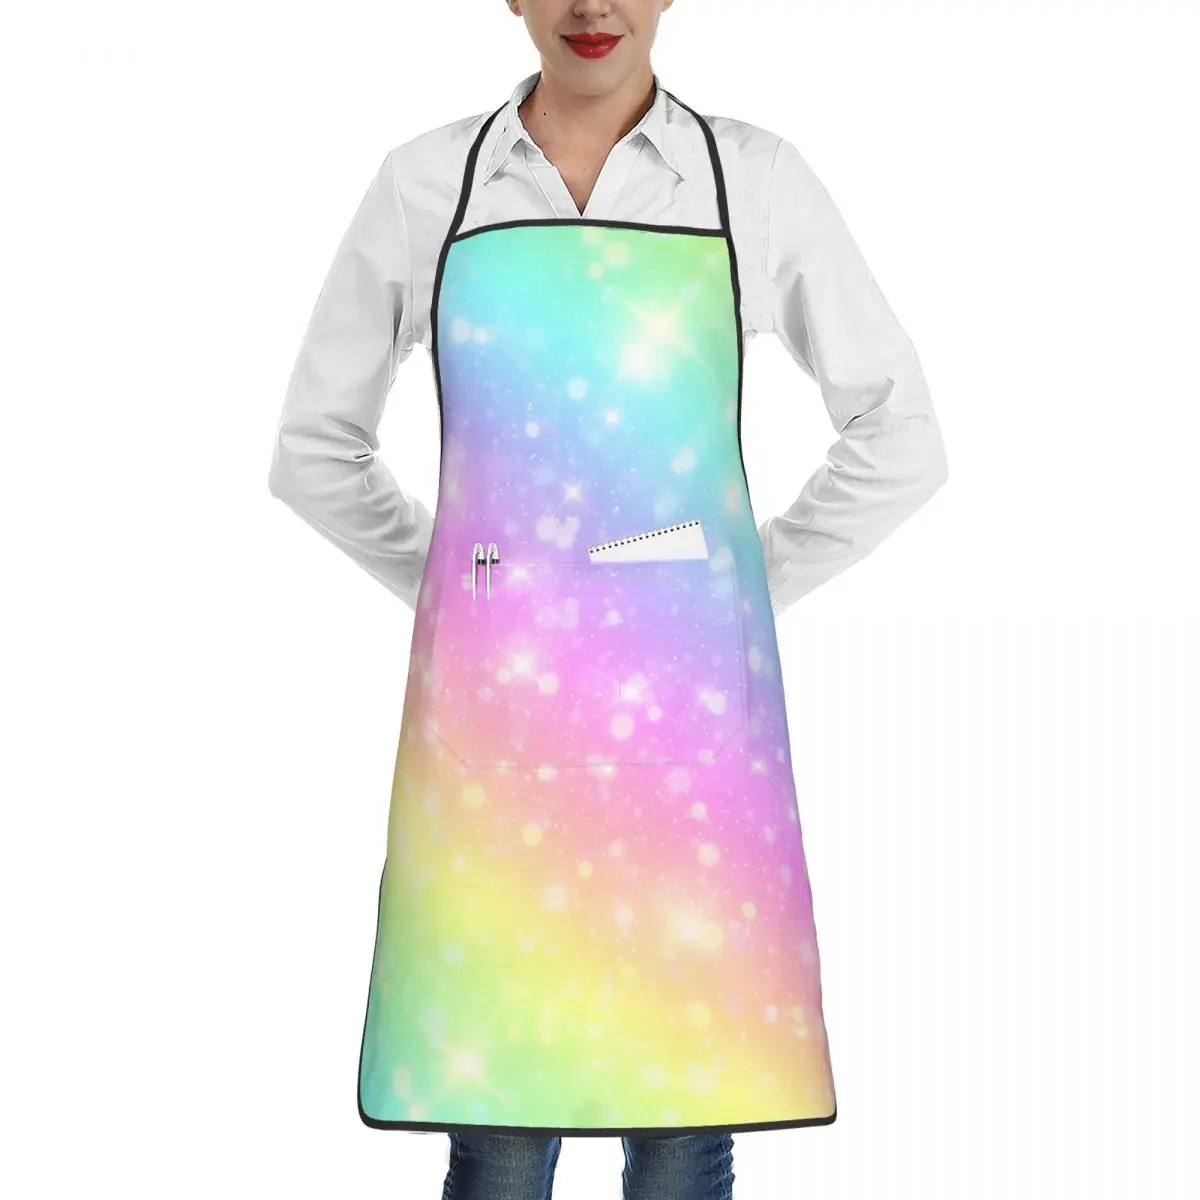 

Galaxy Fantasy Pastel Color Sky With Rainbow Apron for Men Women Adult Kitchen Chef Bib Tablier Cuisine Cooking Baking Painting